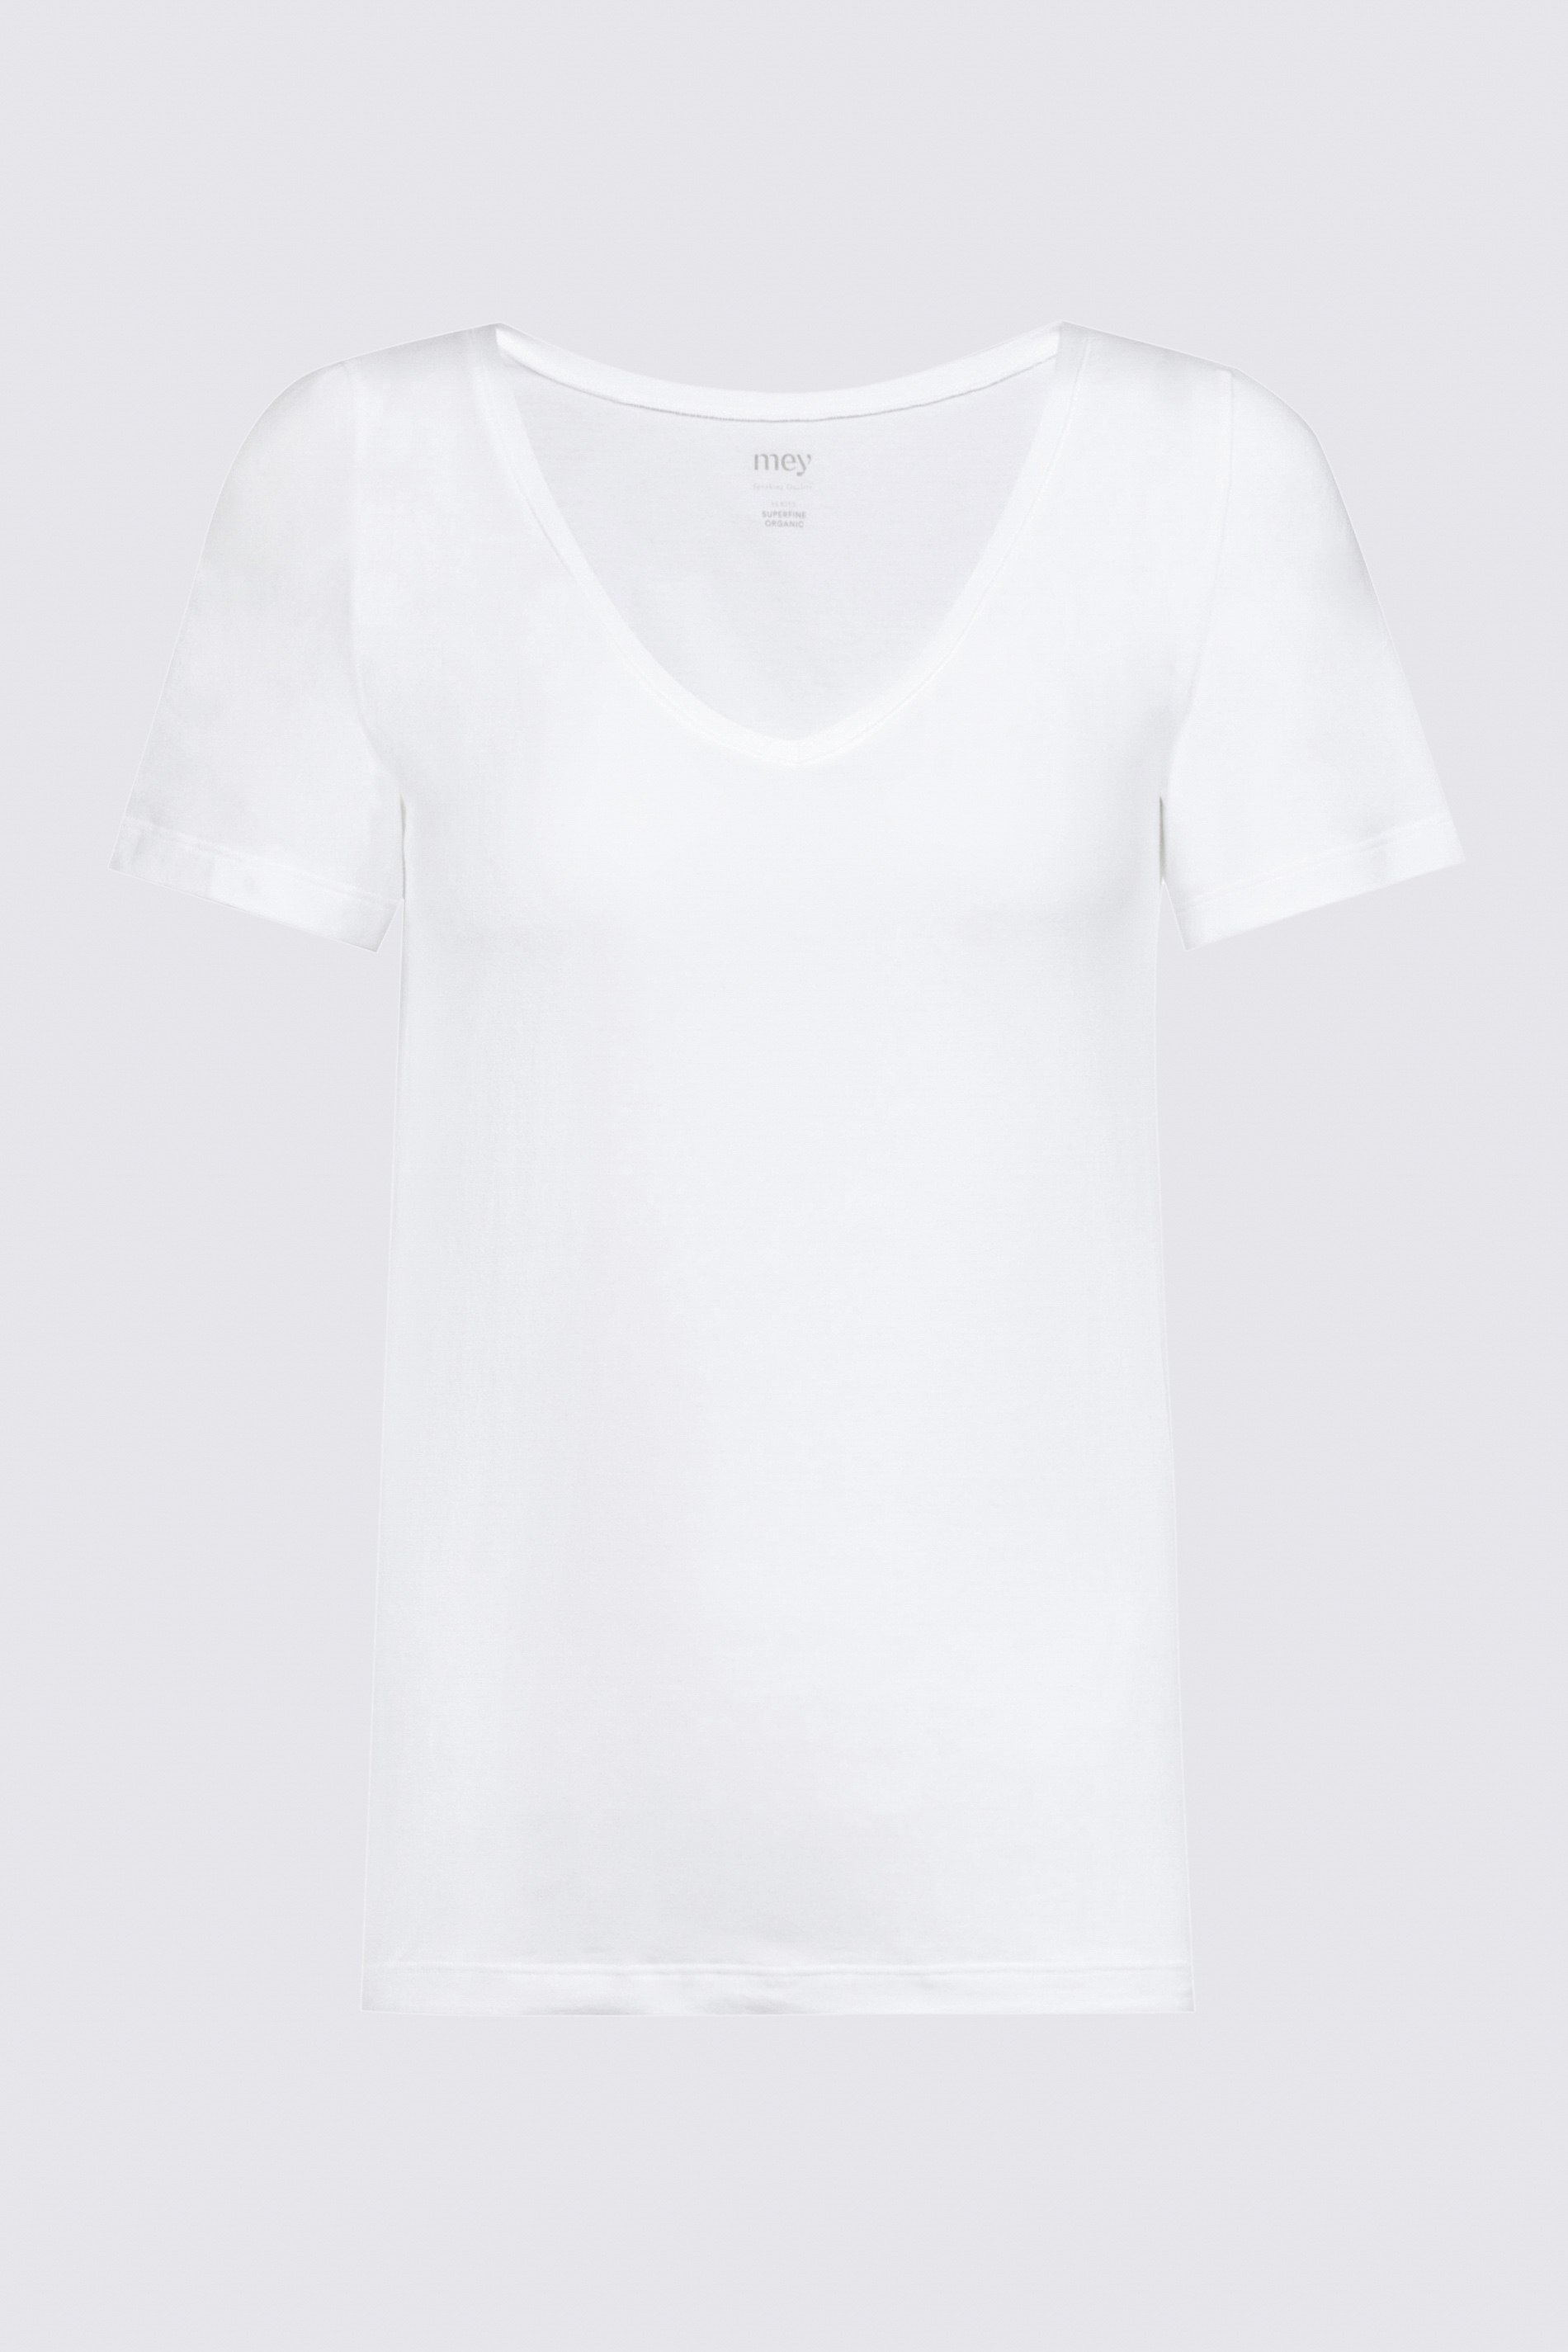 Shirt Wit Serie Superfine Organic Uitknippen | mey®